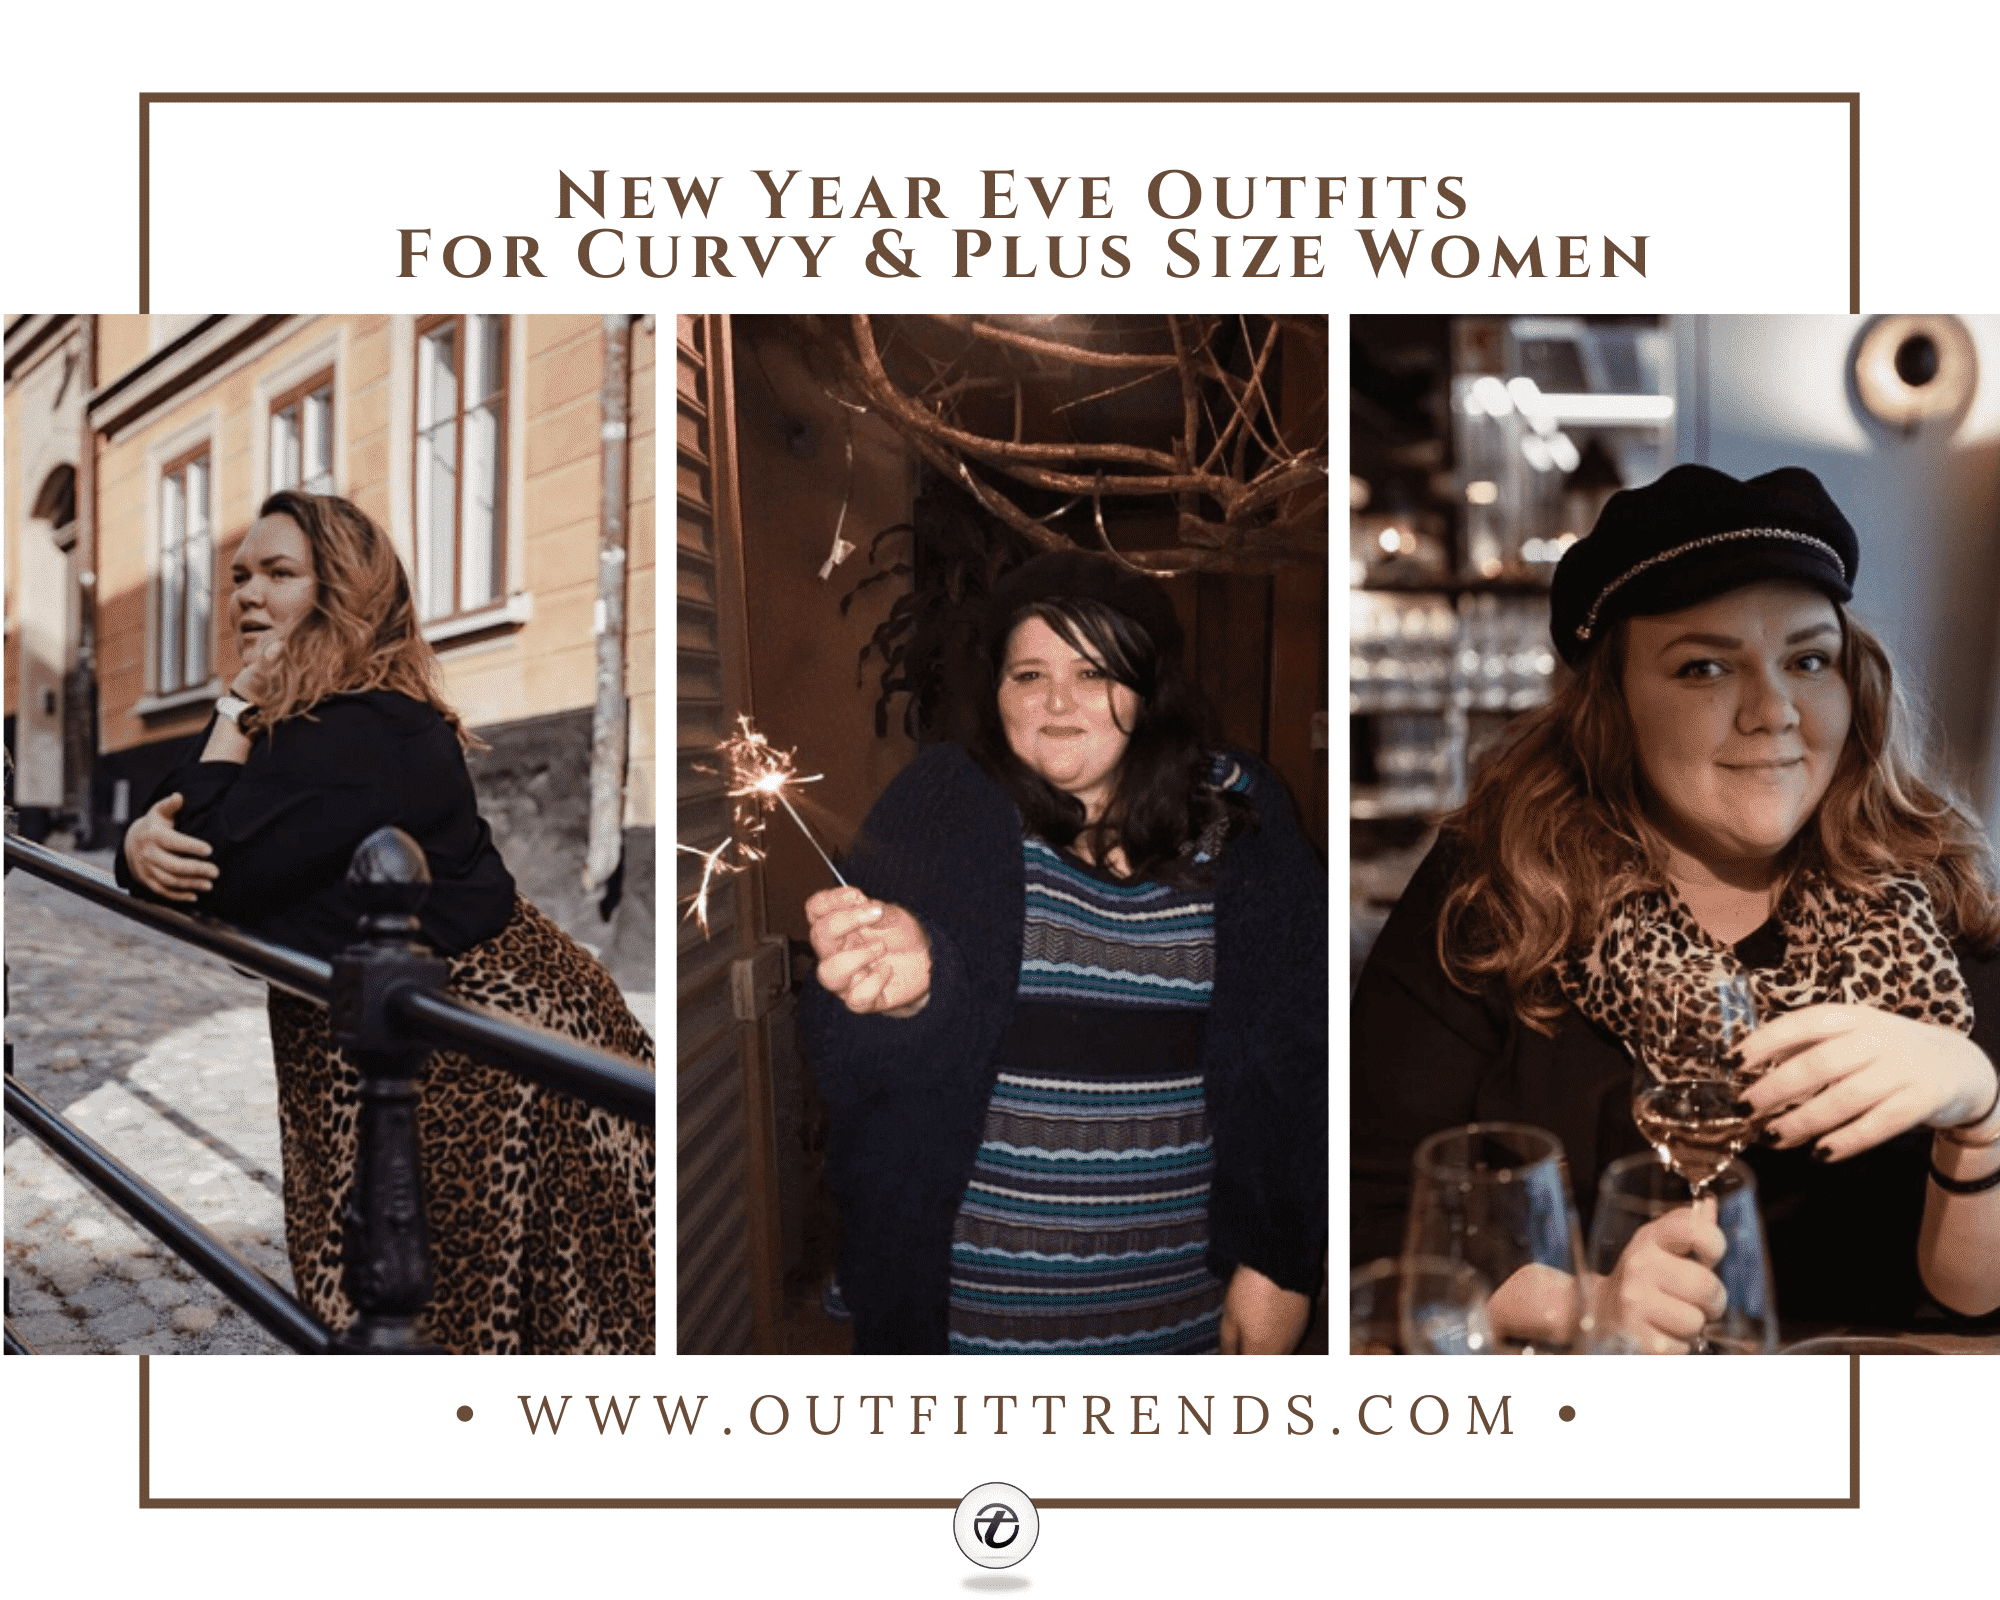 plus size women new year outfits